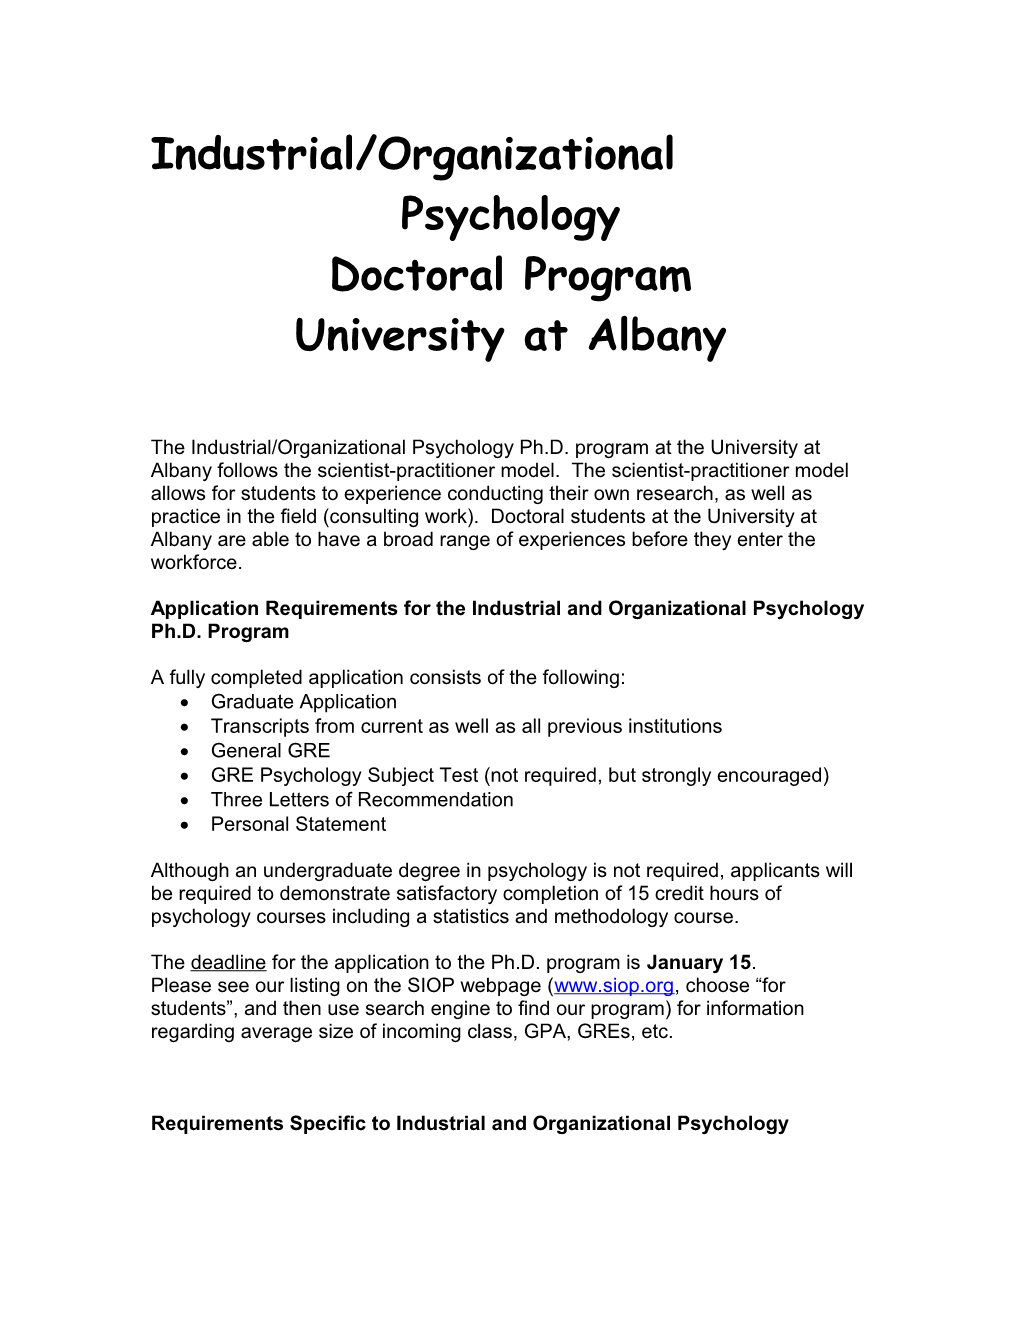 Requirements Specific to Industrial and Organizational Psychology